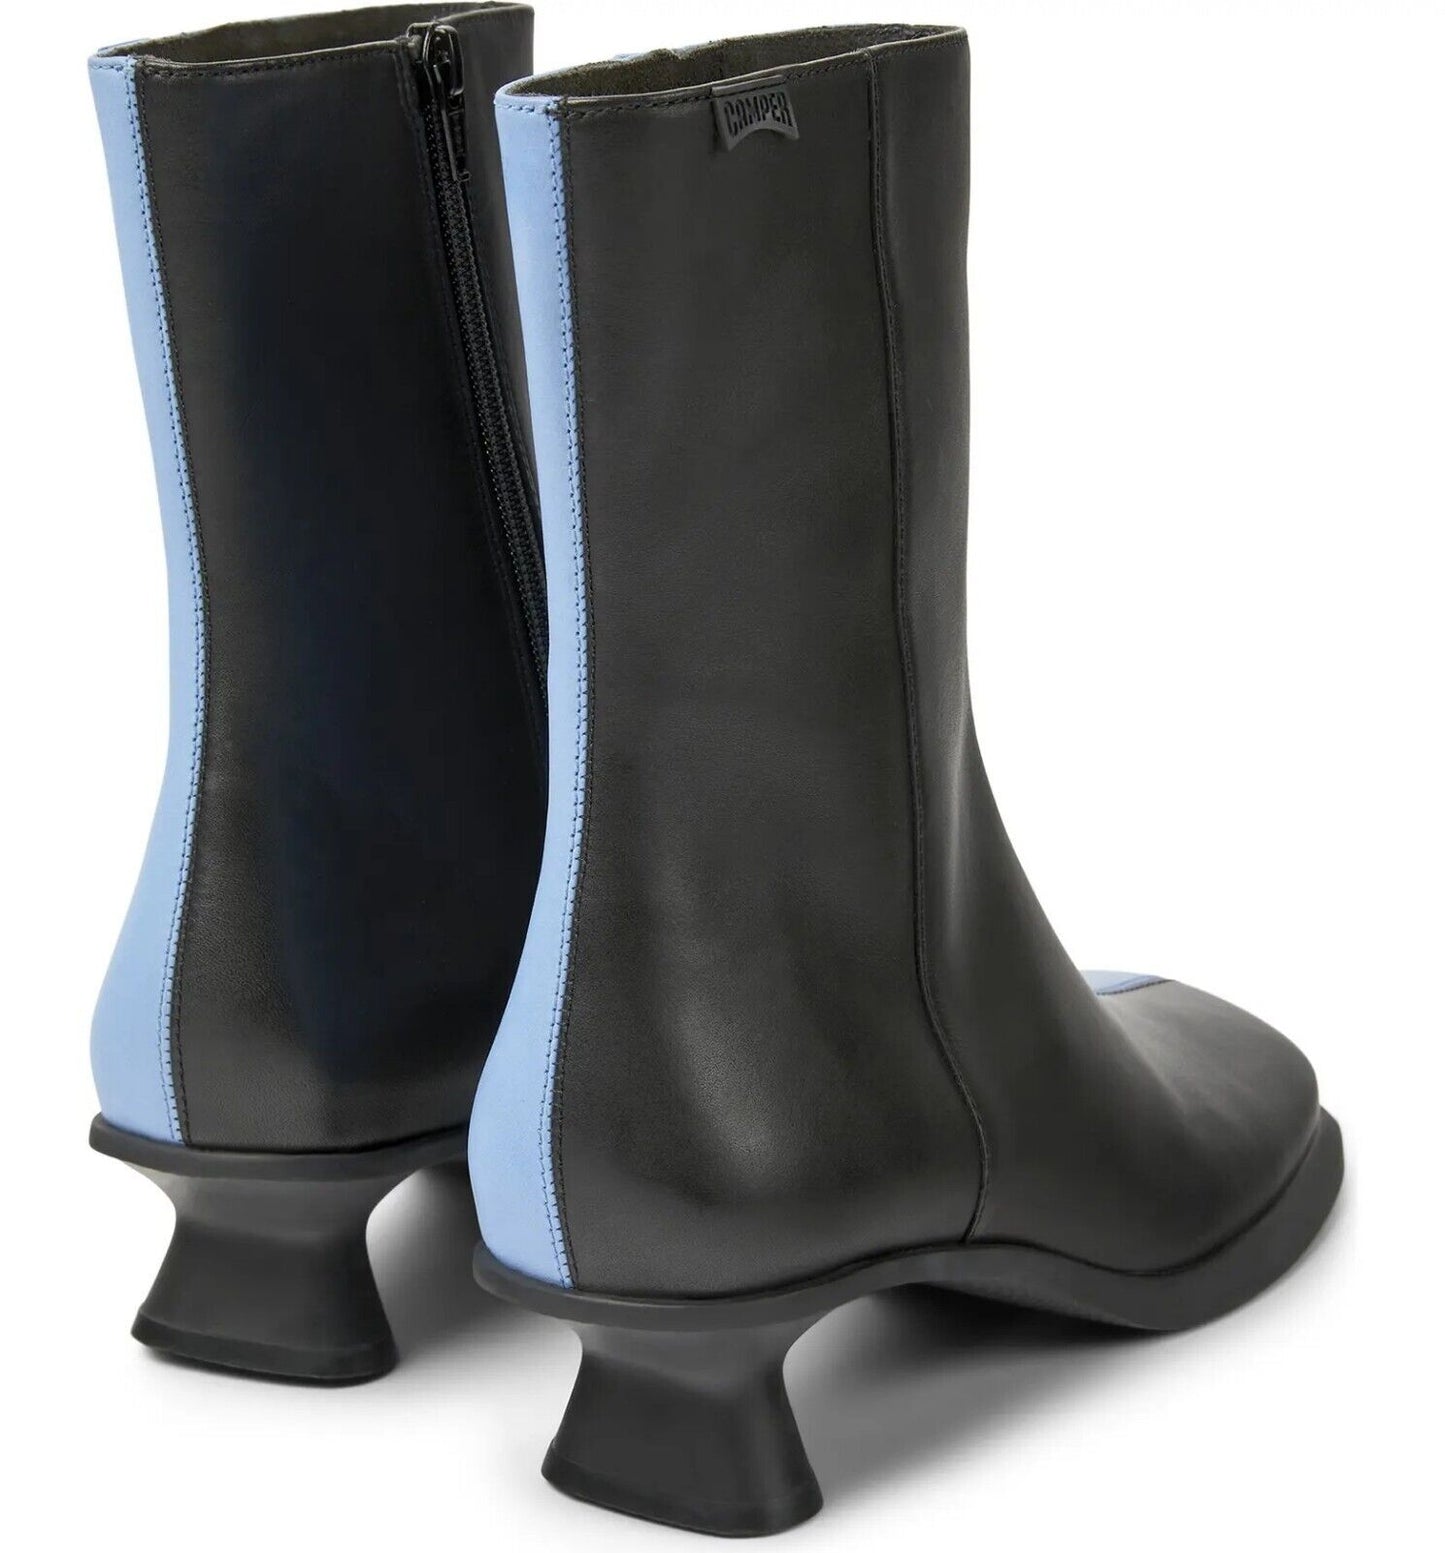 CAMPER Twins Two Tone Colorblock Black Blue Leather Boots Size US 9